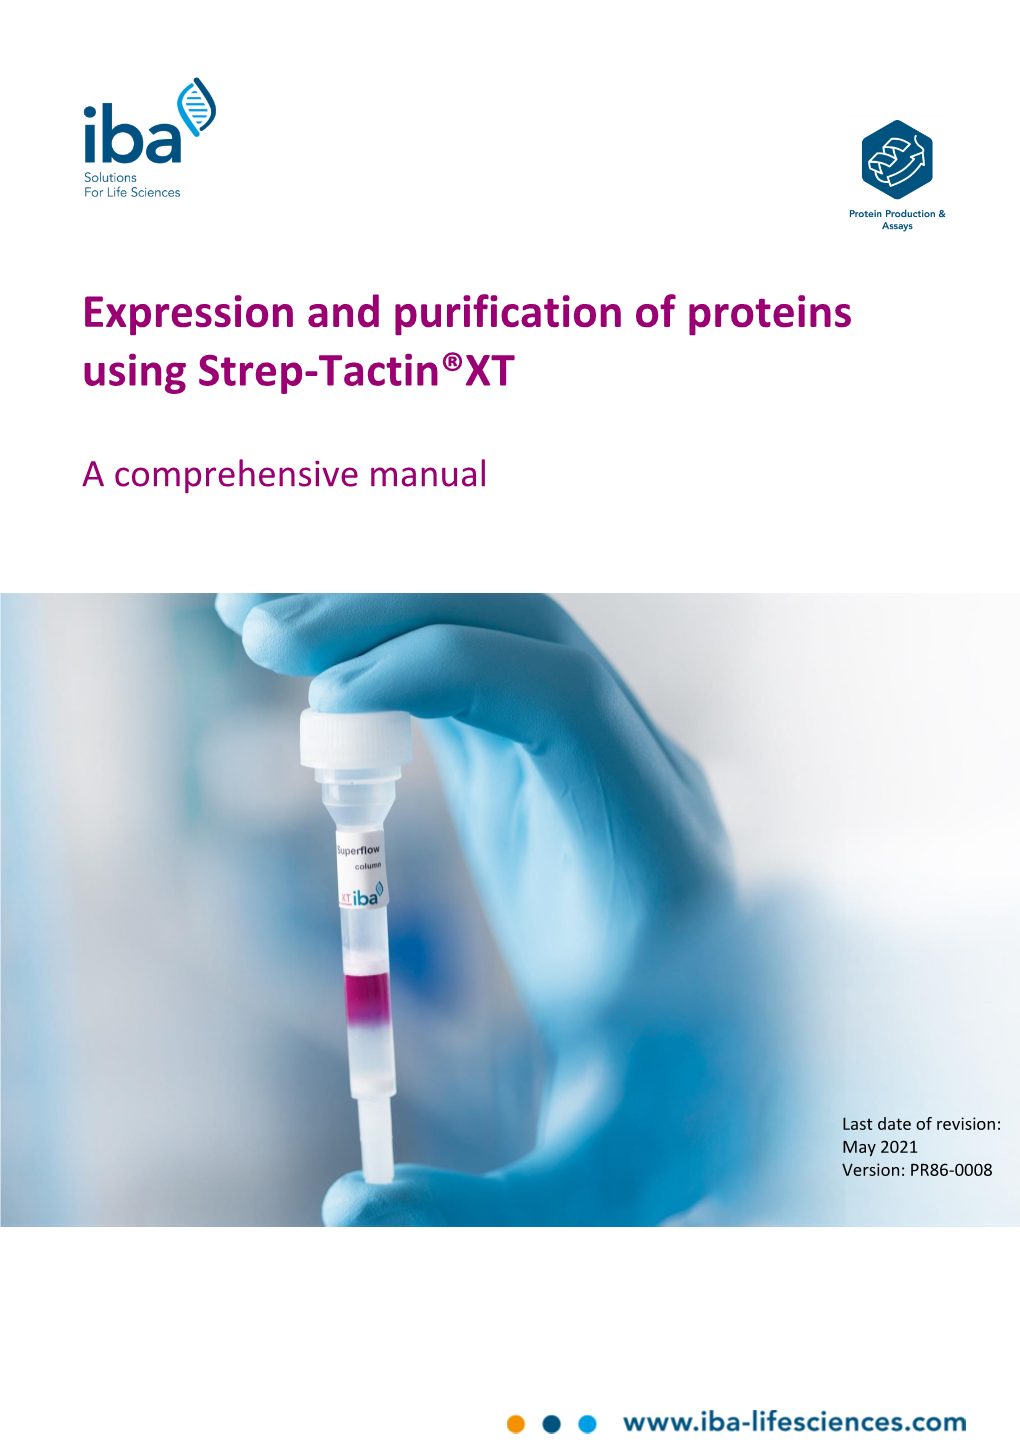 Expression and Purification of Proteins Using Strep-Tactin®XT